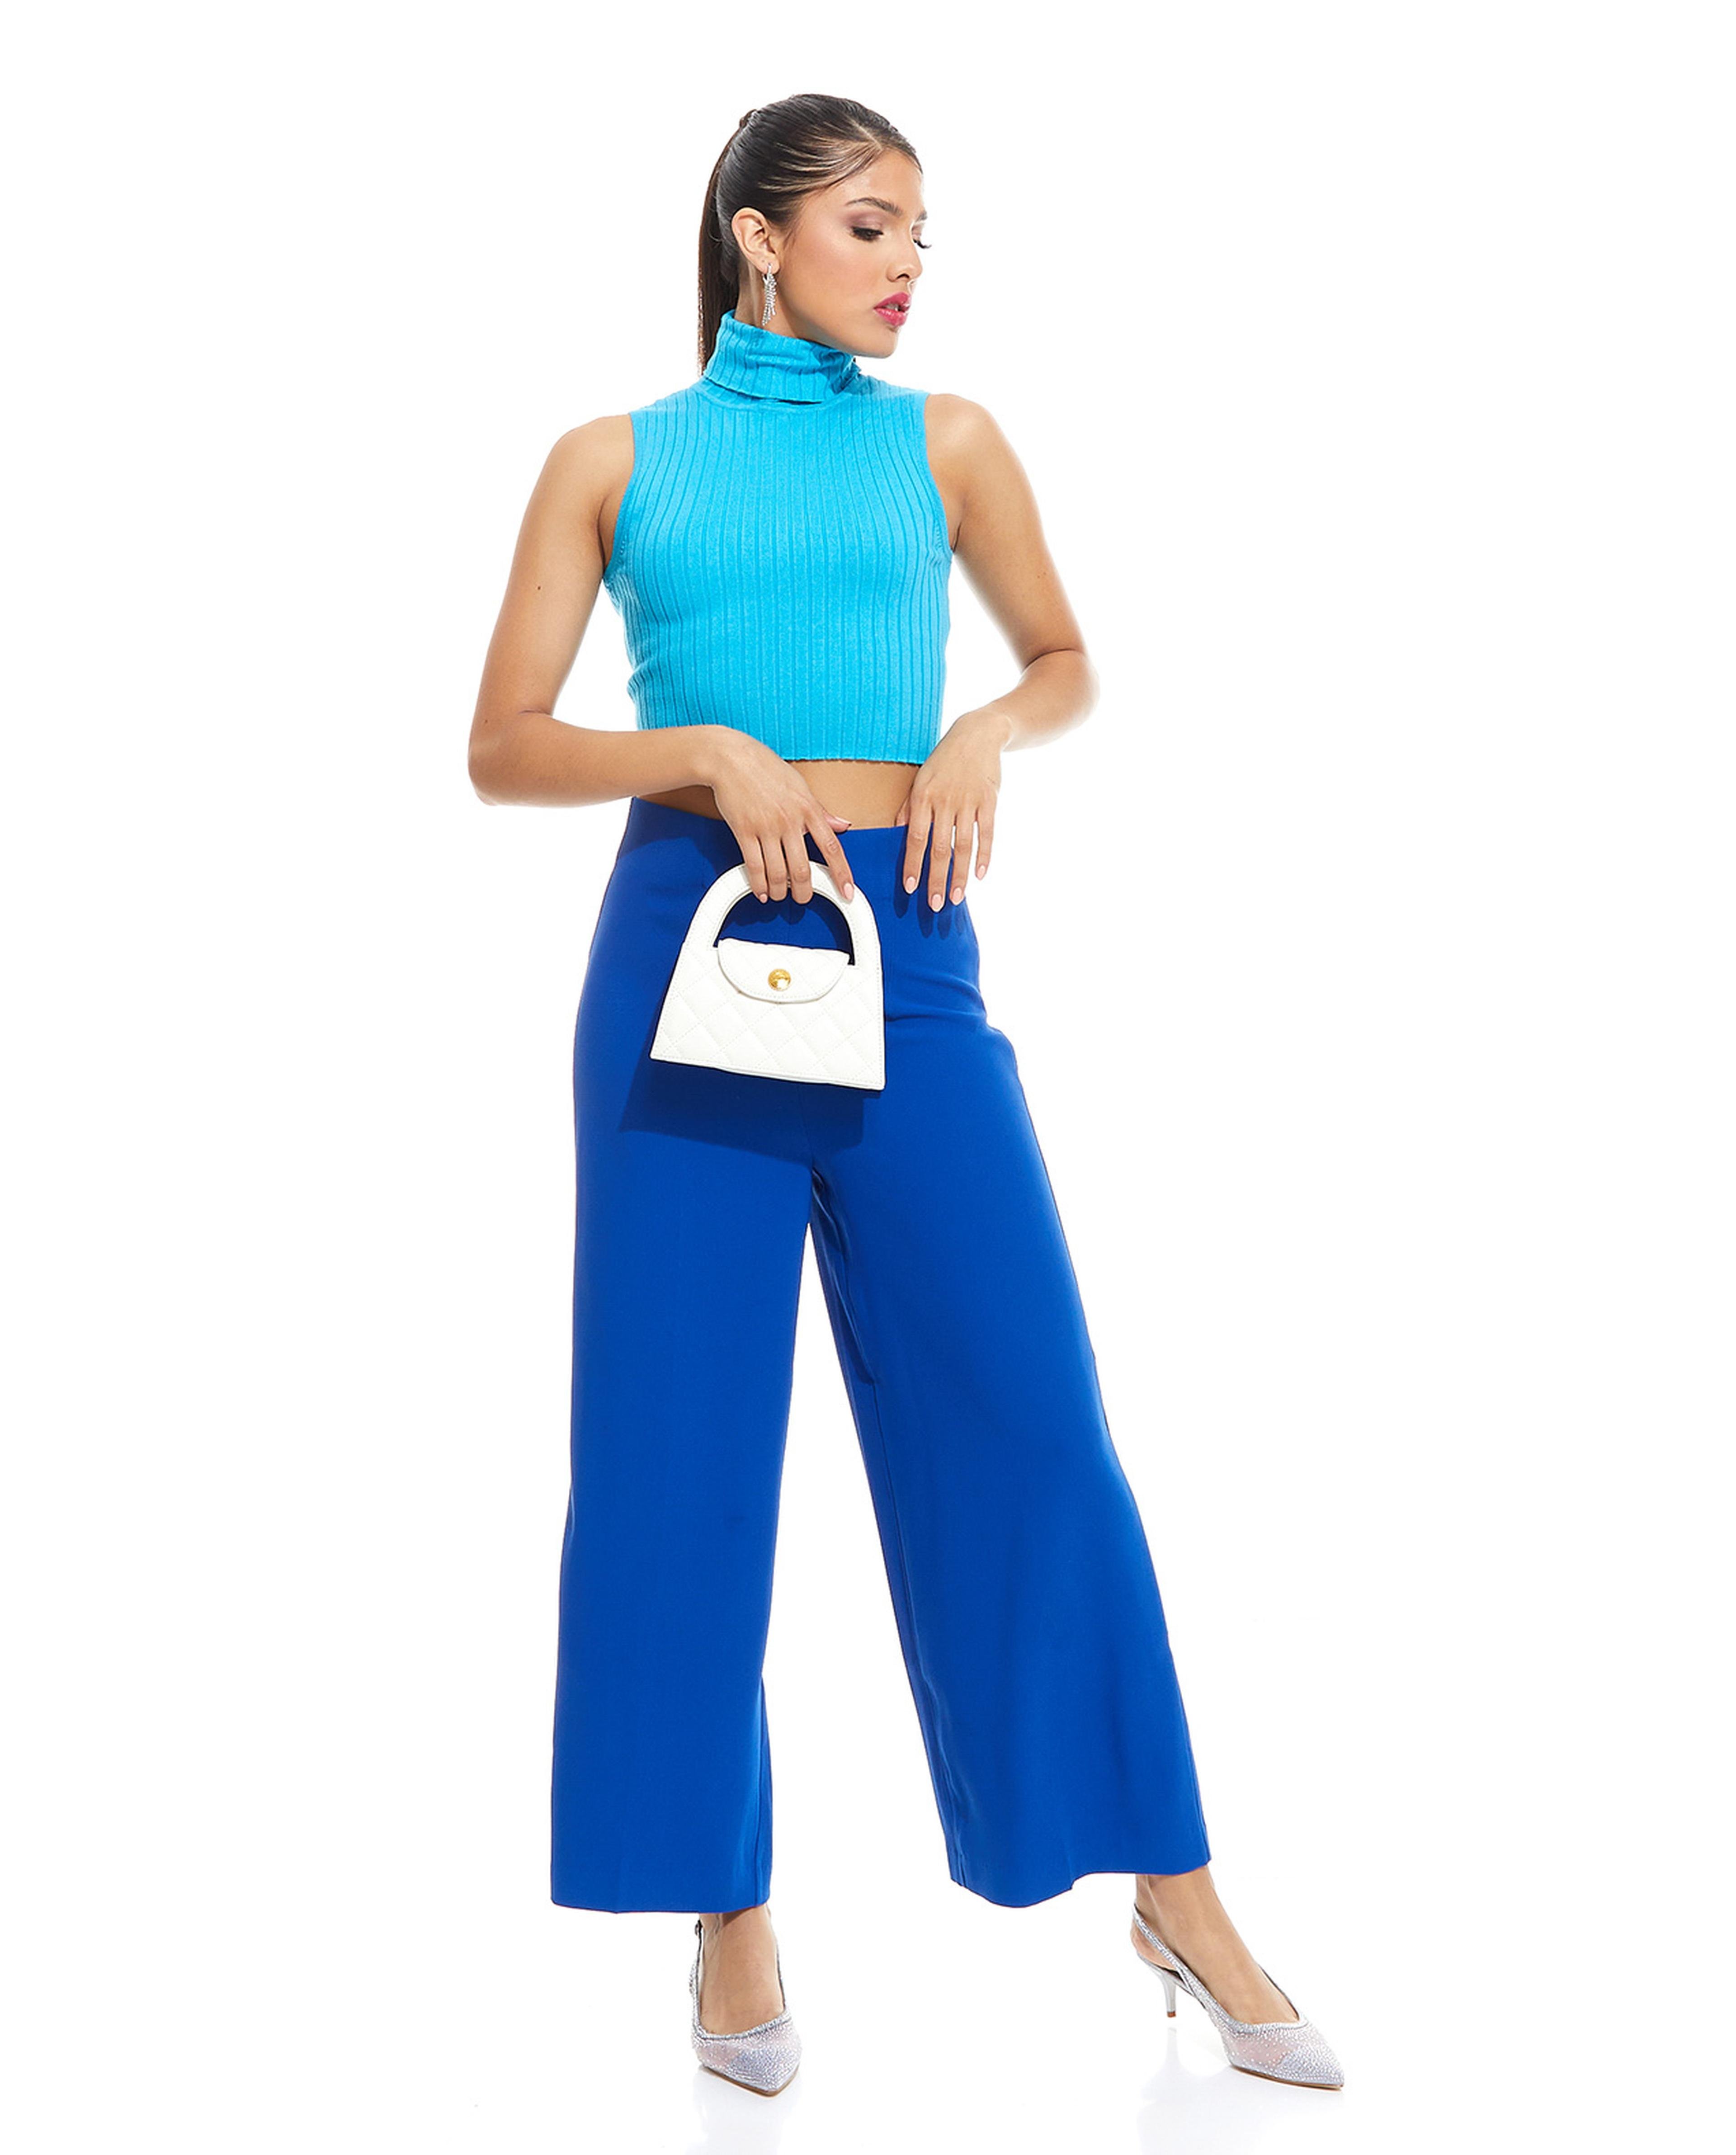 Ribbed Sleeveless Crop Top with Turtleneck